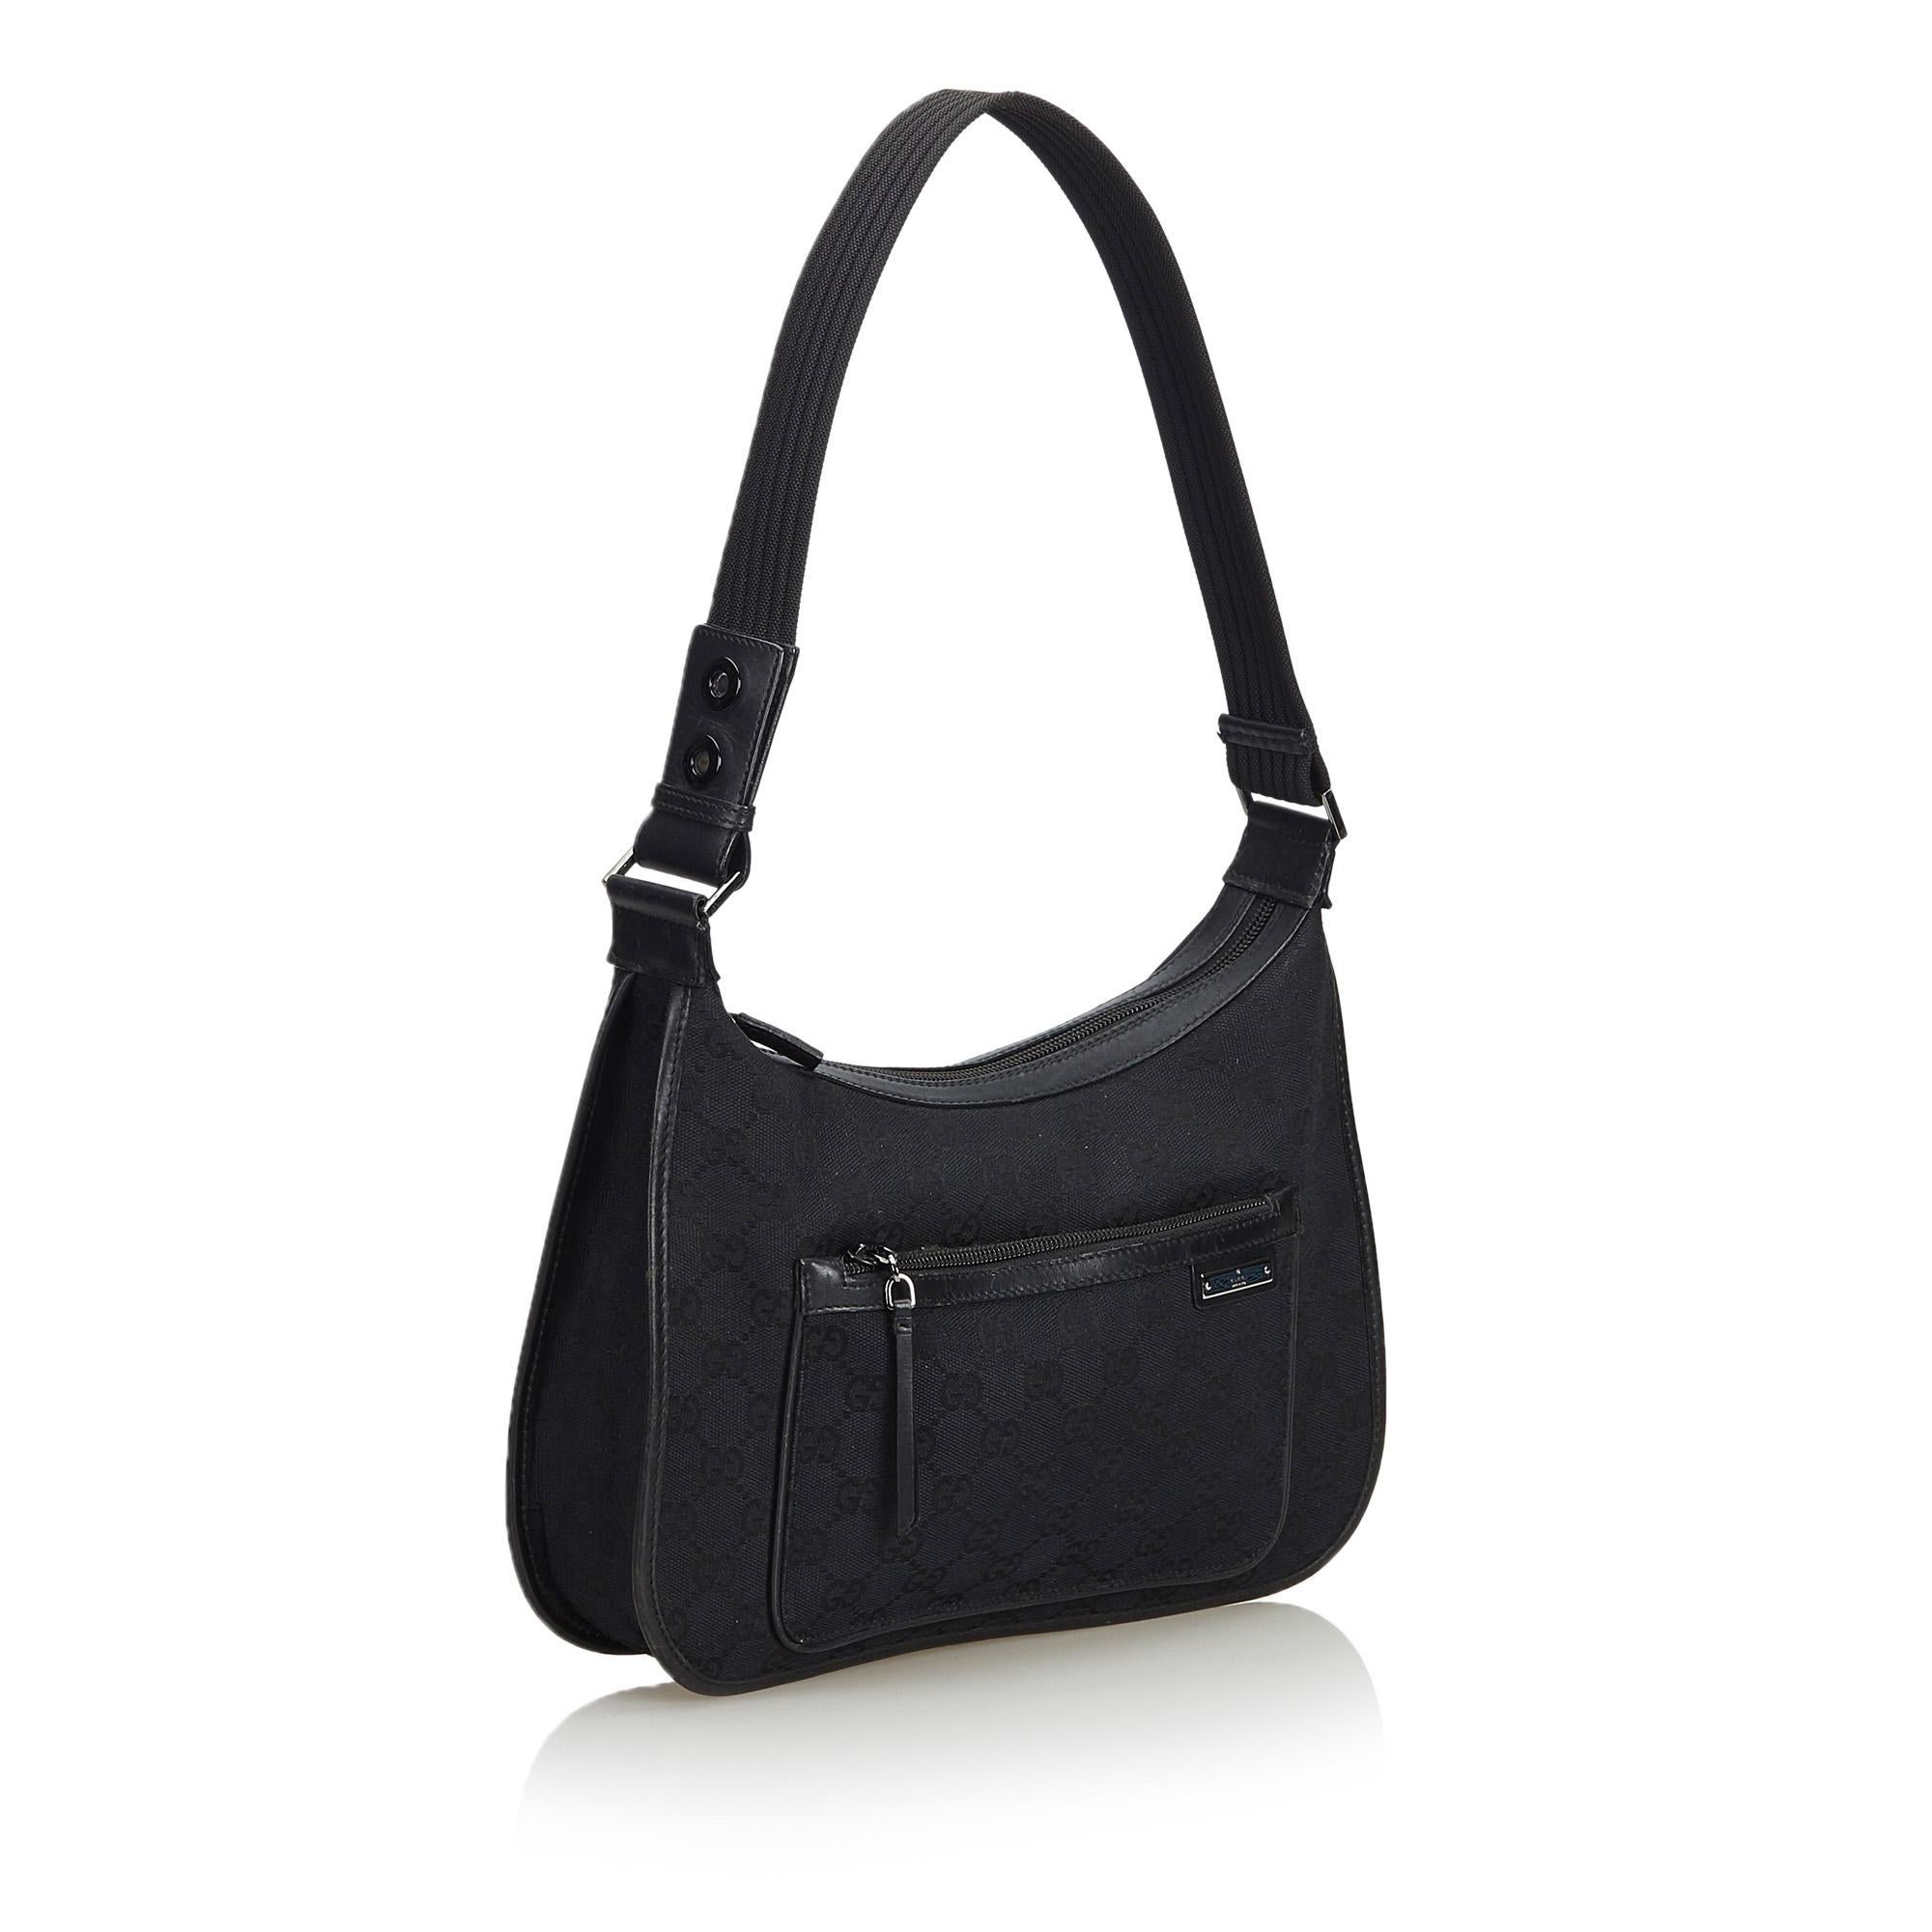 This shoulder bag features a canvas body, an exterior front zip pocket, a flat strap, a top zip closure, and an interior zip pocket. It carries as B condition rating.

Inclusions: 
This item does not come with inclusions.

Dimensions:
Length: 20.00